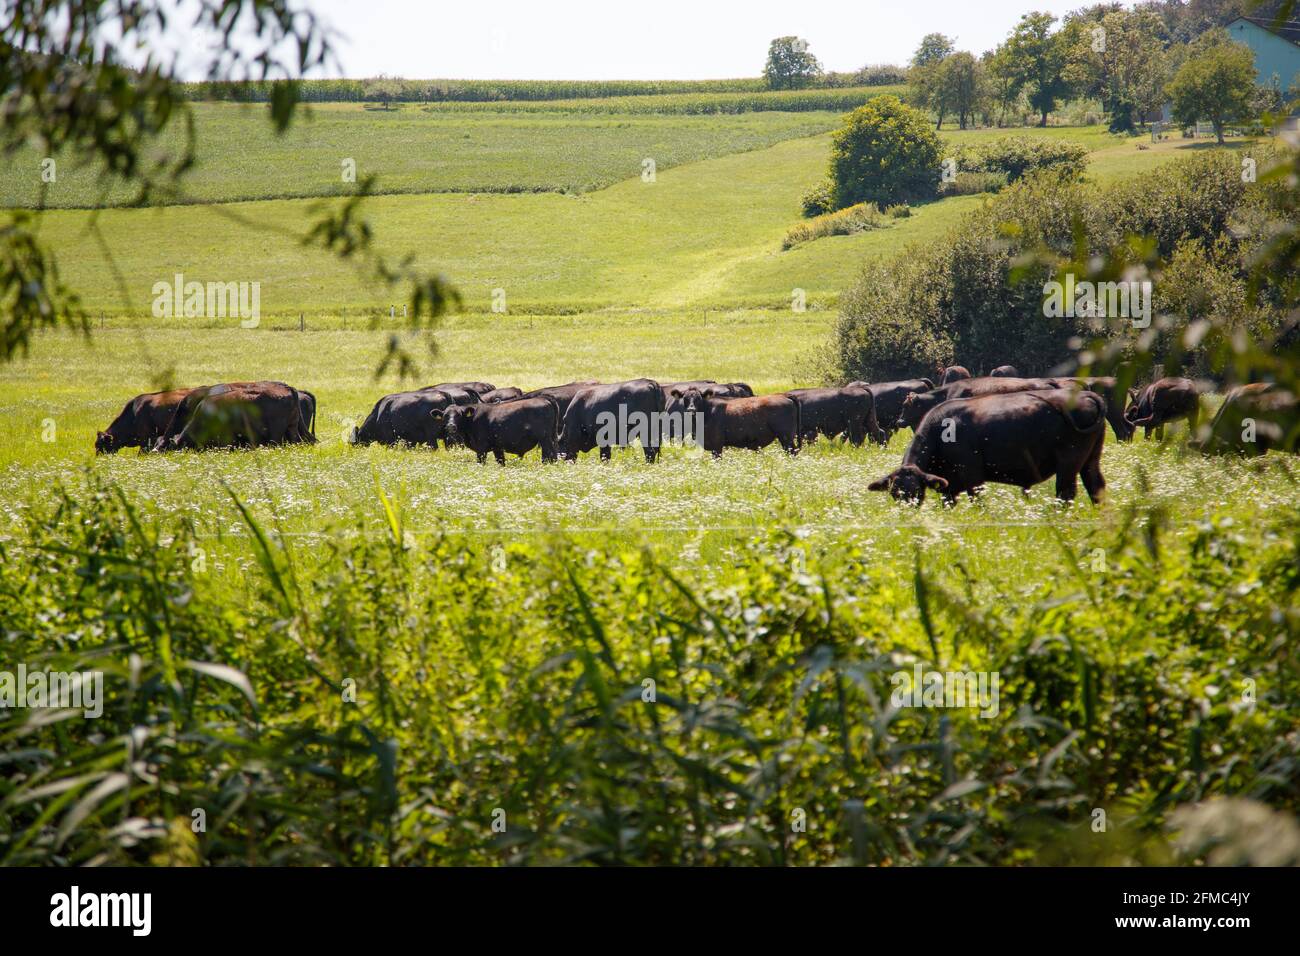 Scenic rural view of a herd of oxen in a field in Zickental, Rohr, Southern Burgenland, Austria Stock Photo